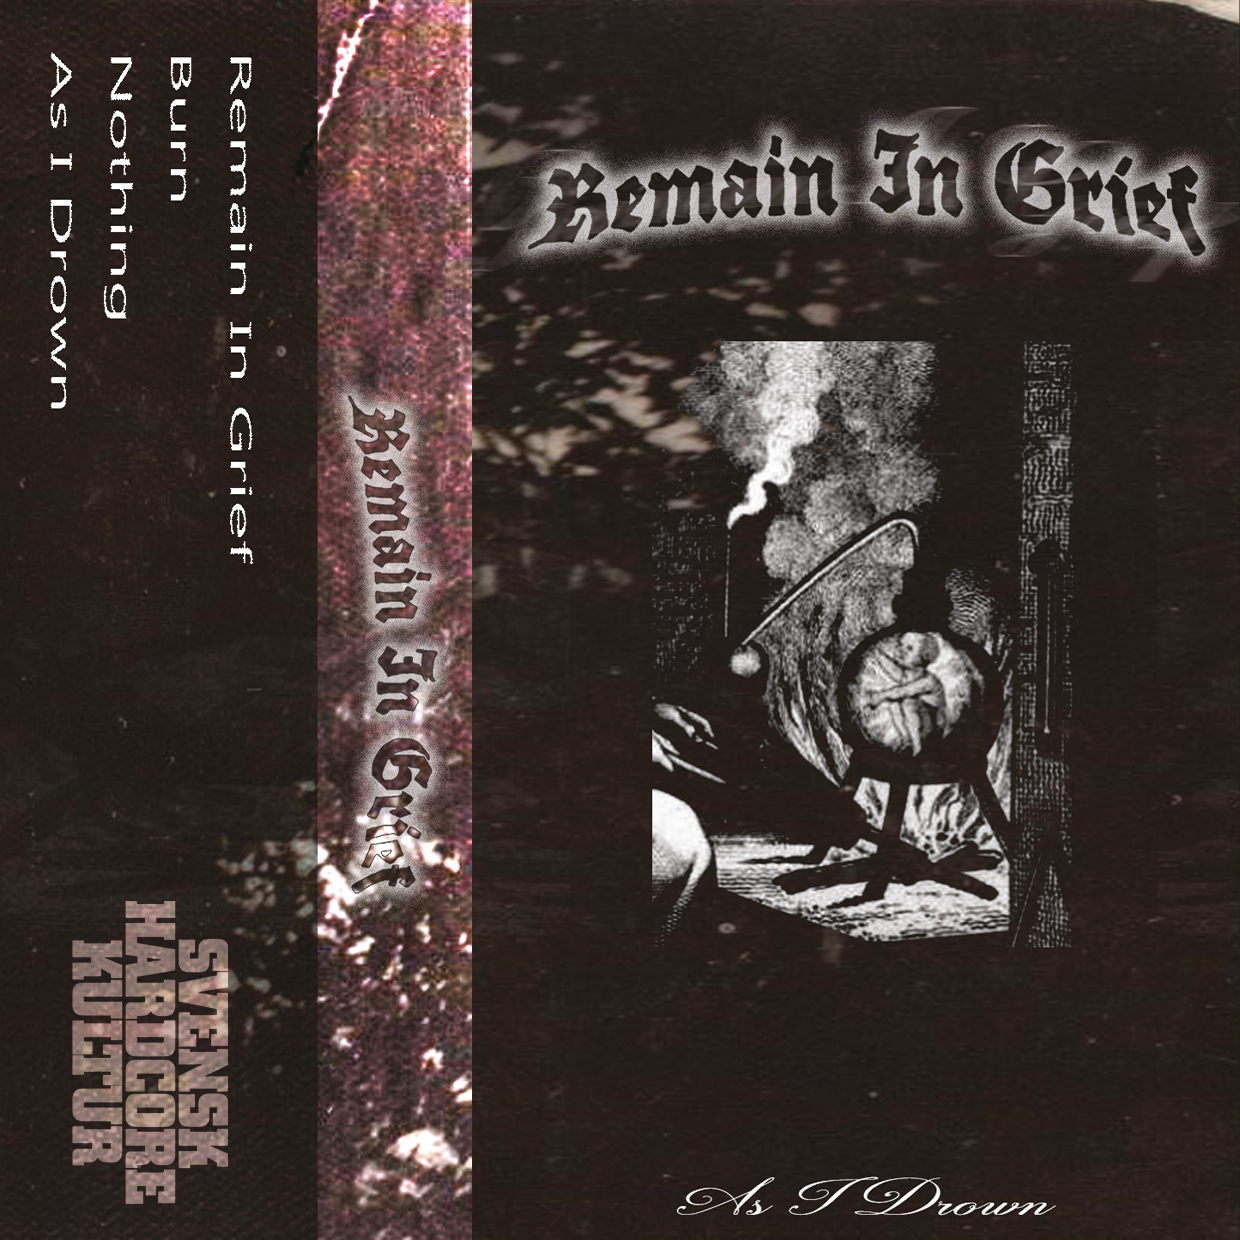 Remain in Grief – As I Drown (cassette)